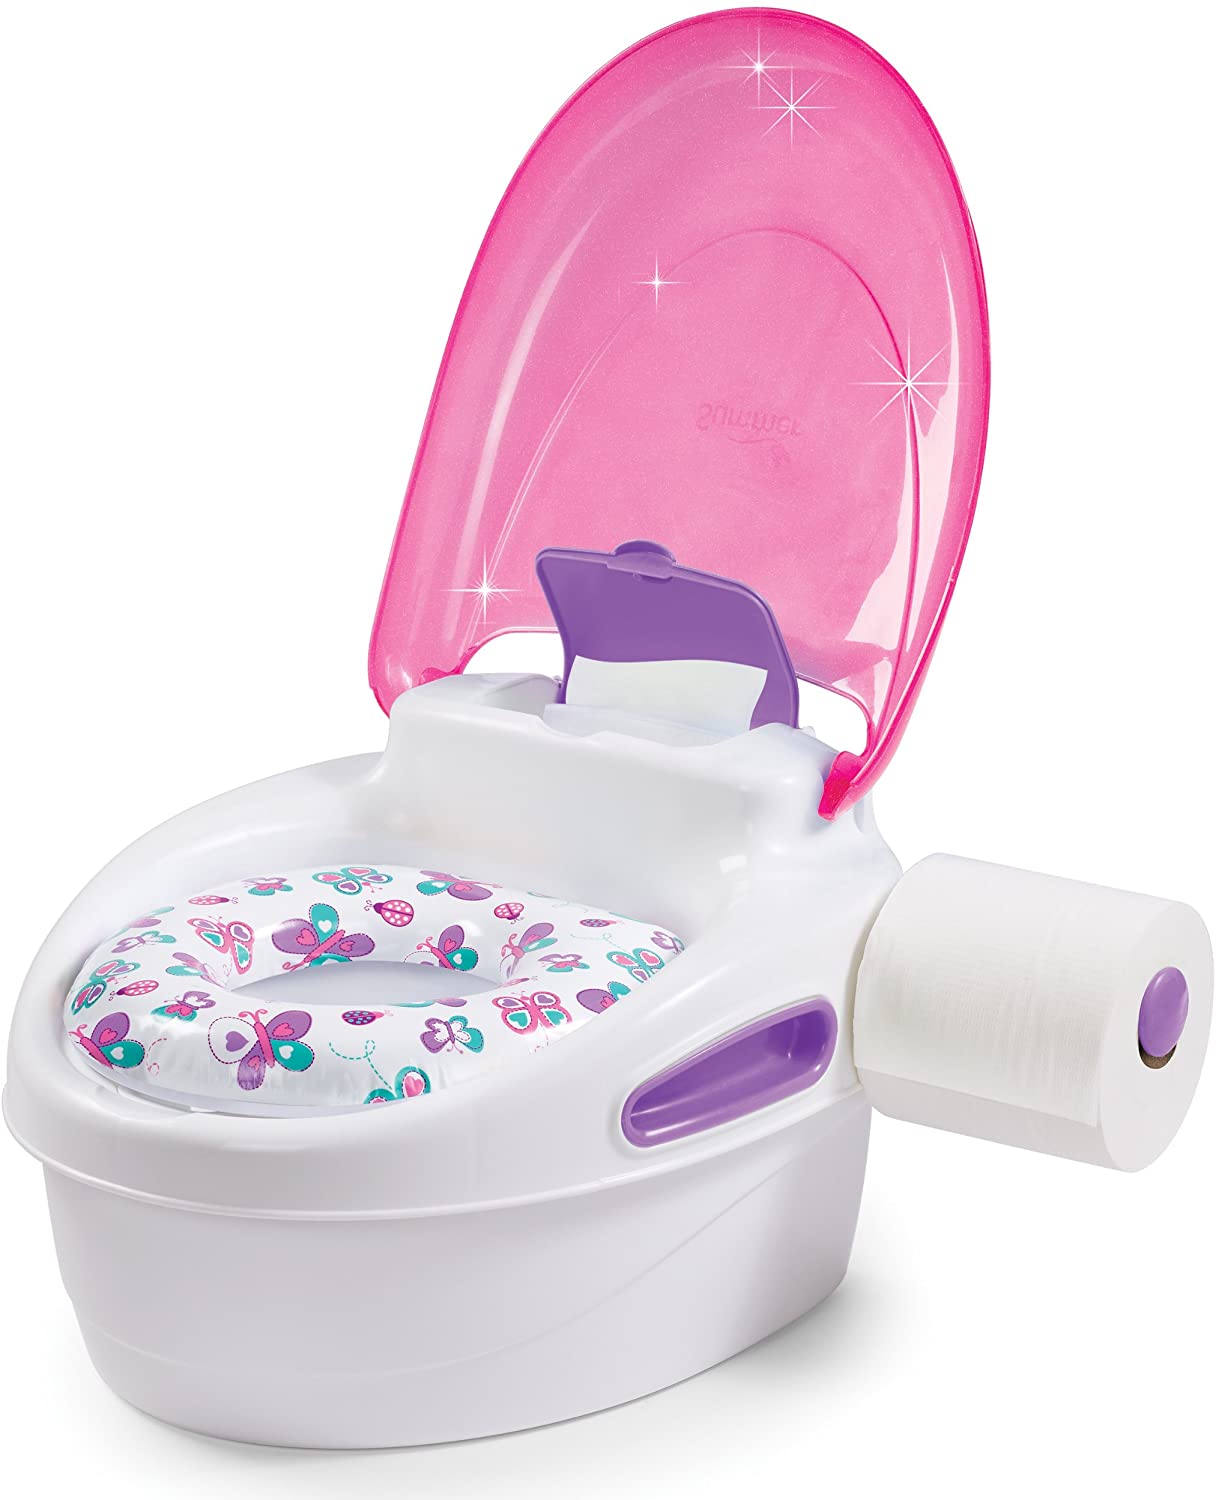 Ideal Gift Great for Potty Training Kids Stool Pink Step 